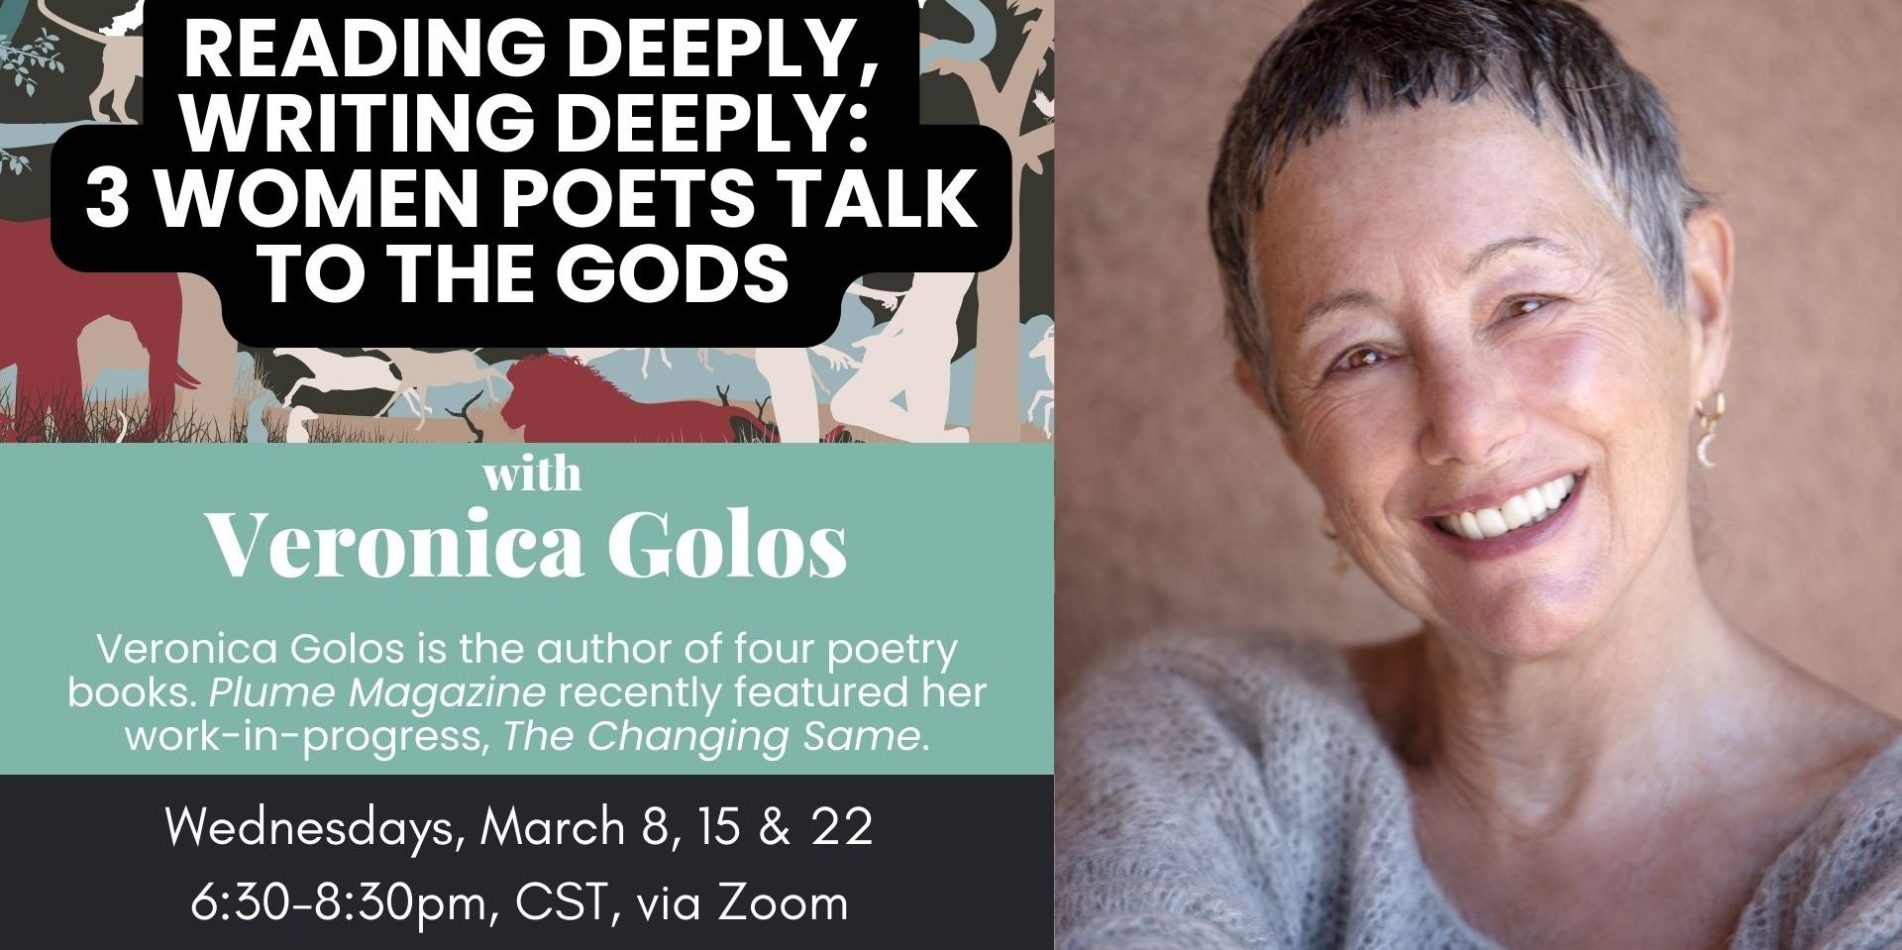 Reading Deeply, Writing Deeply: 3 Women Poets Talk to the Gods with Veronica Golos